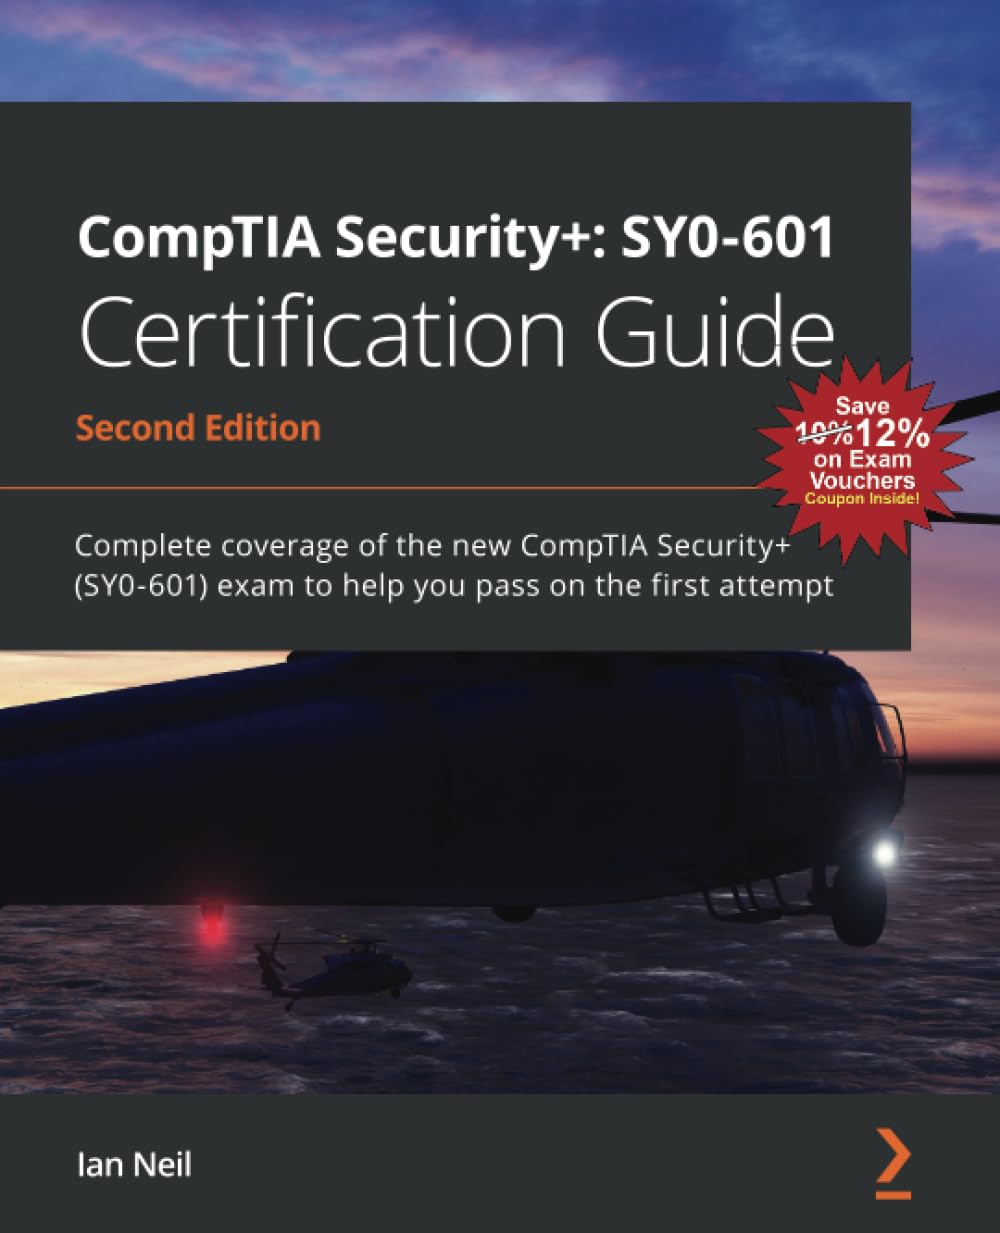 CompTIA Security+: SY0-601 Certification Guide: Complete coverage of the new CompTIA Security+ (SY0-601) exam to help you pass on the first attempt, 2nd Edition